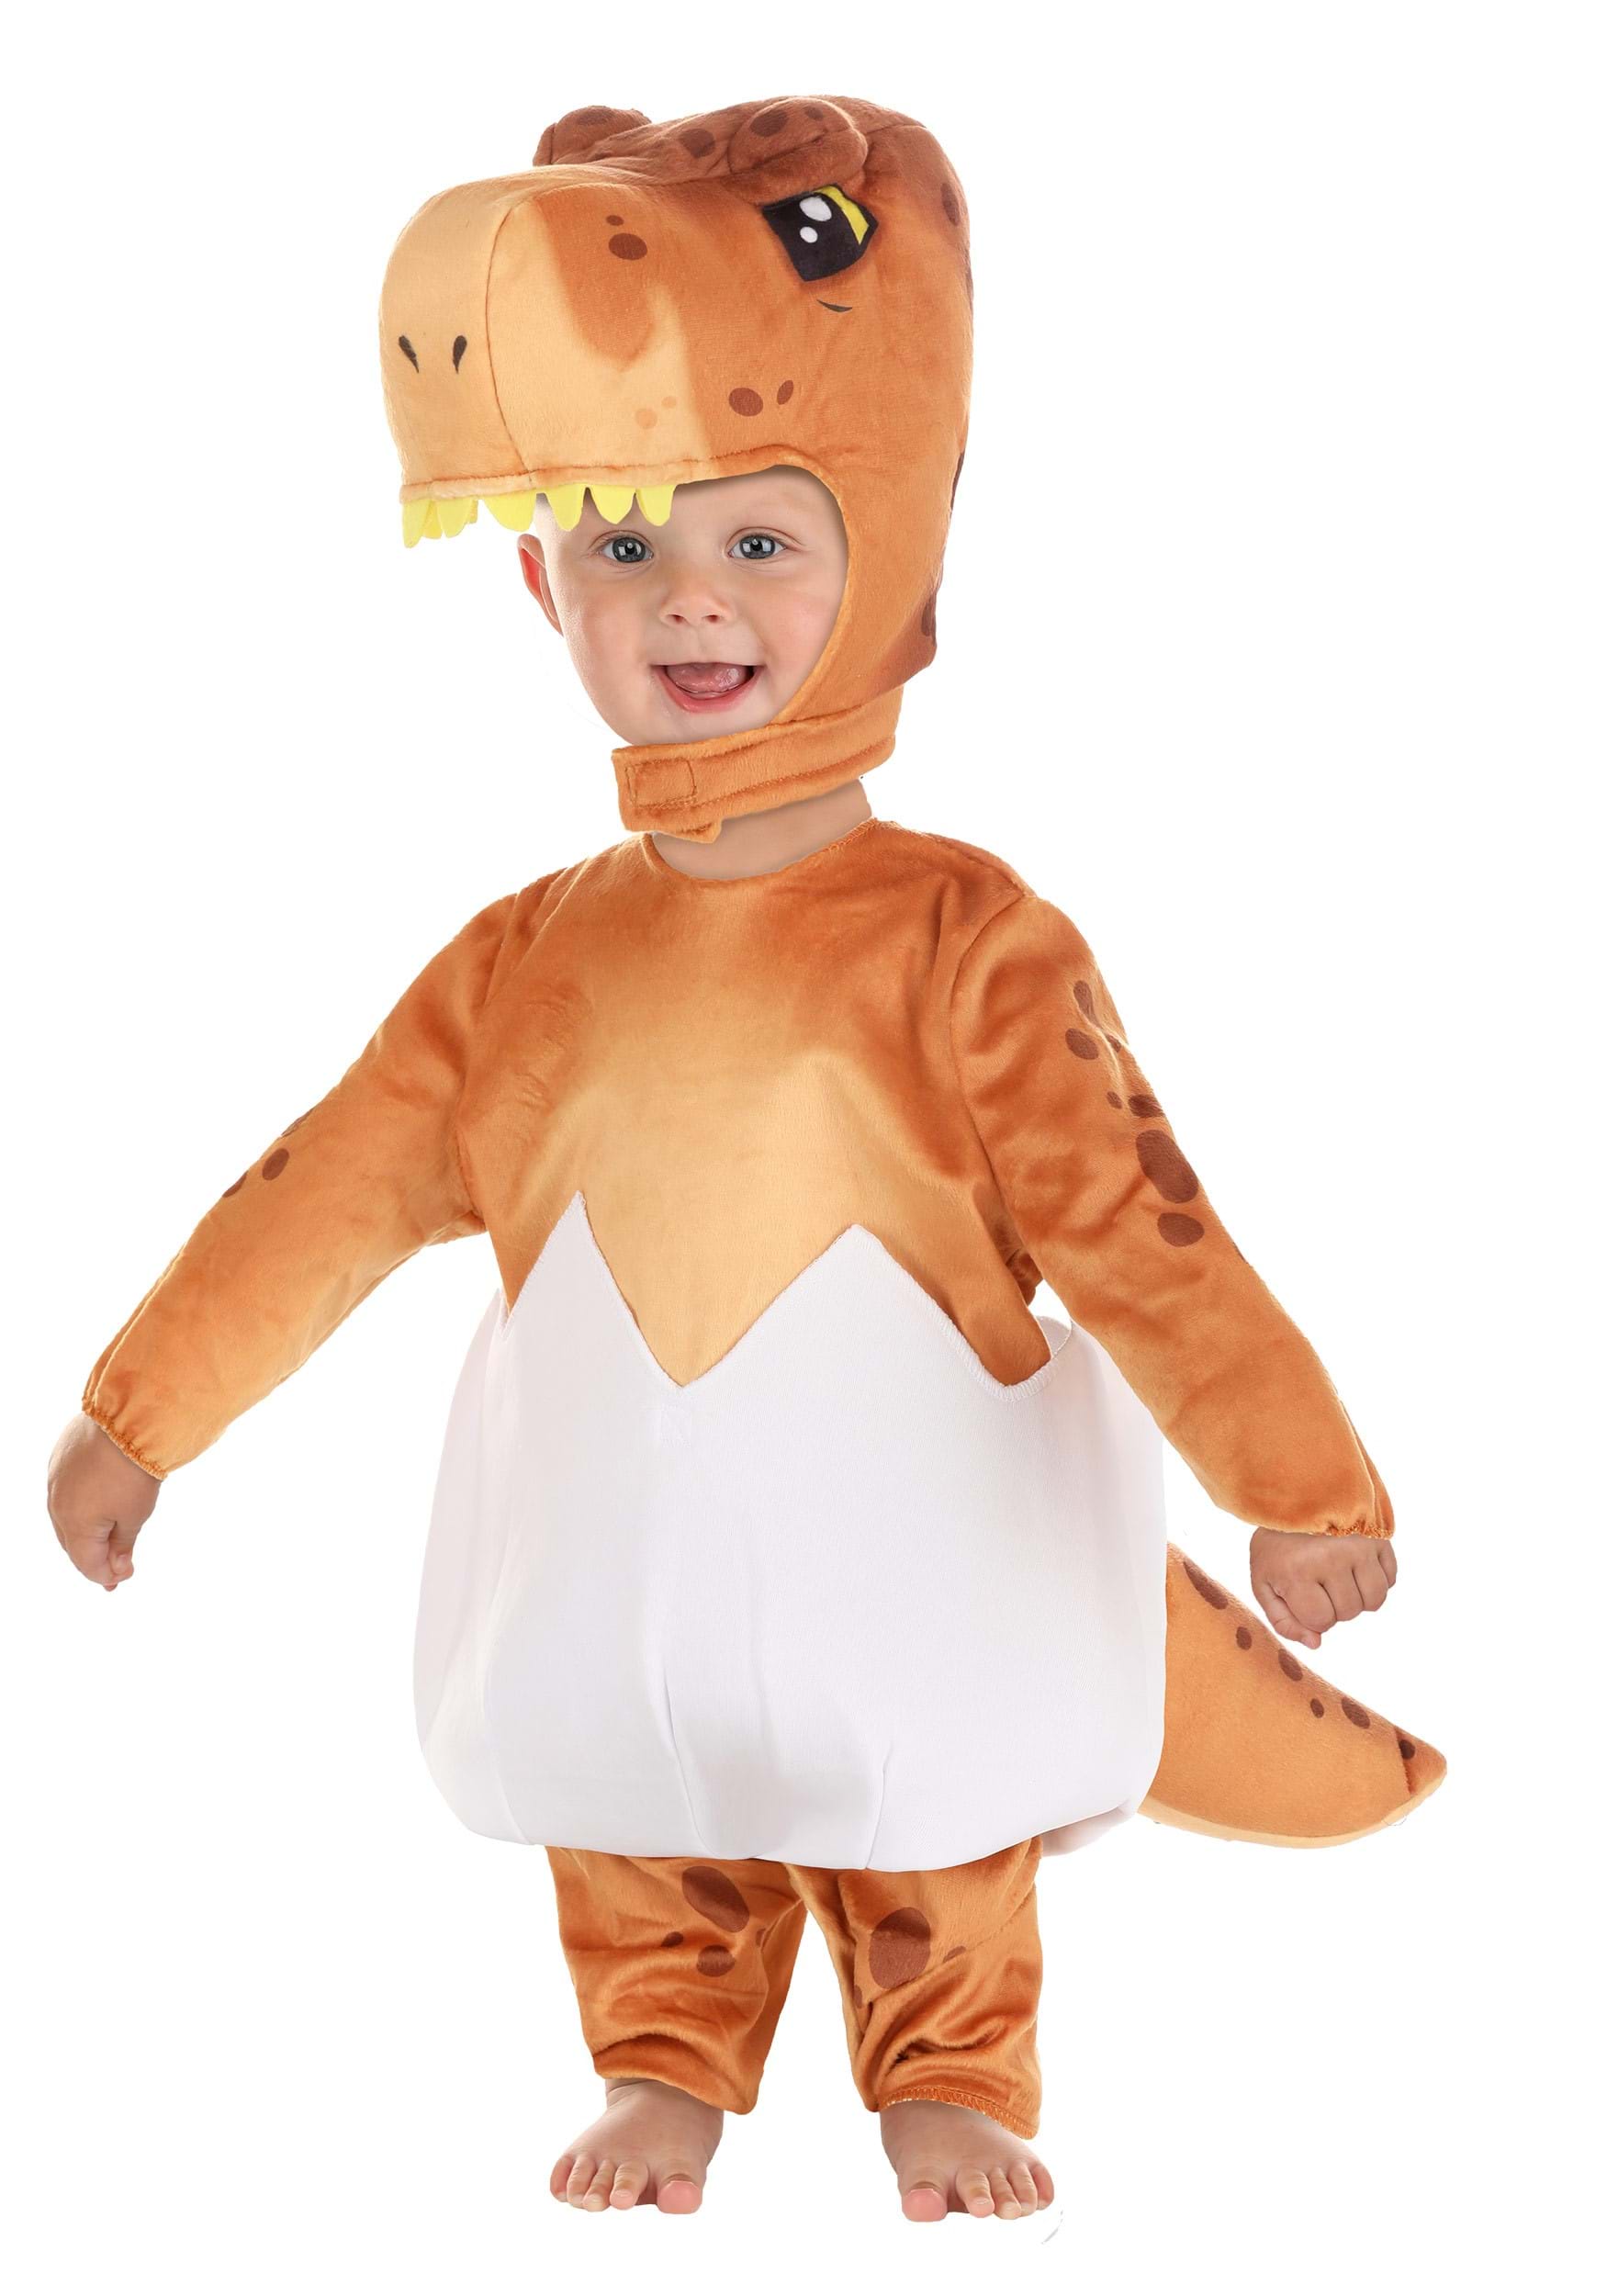 Photos - Fancy Dress T-Rex Disguise Limited Jurassic World Infant  Hatchling Costume for Infants 